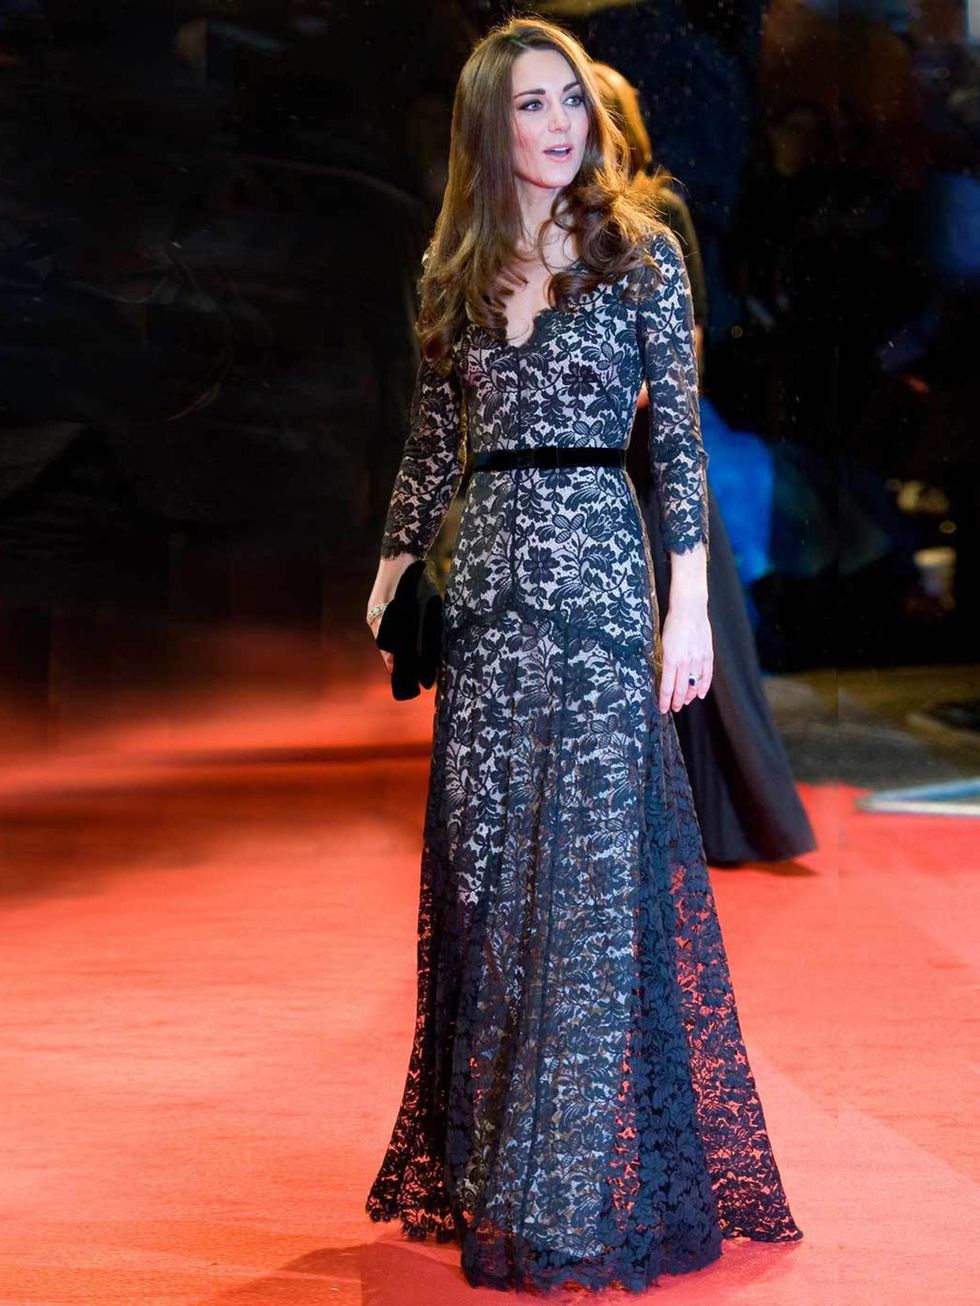 <p><a href="http://www.elleuk.com/star-style/celebrity-style-files/kate-middleton">Kate Middleton</a> wowing in a <a href="http://www.elleuk.com/catwalk/designer-a-z/temperley-london/spring-summer-2012">Temperley London</a> dress at the War Horse premiere